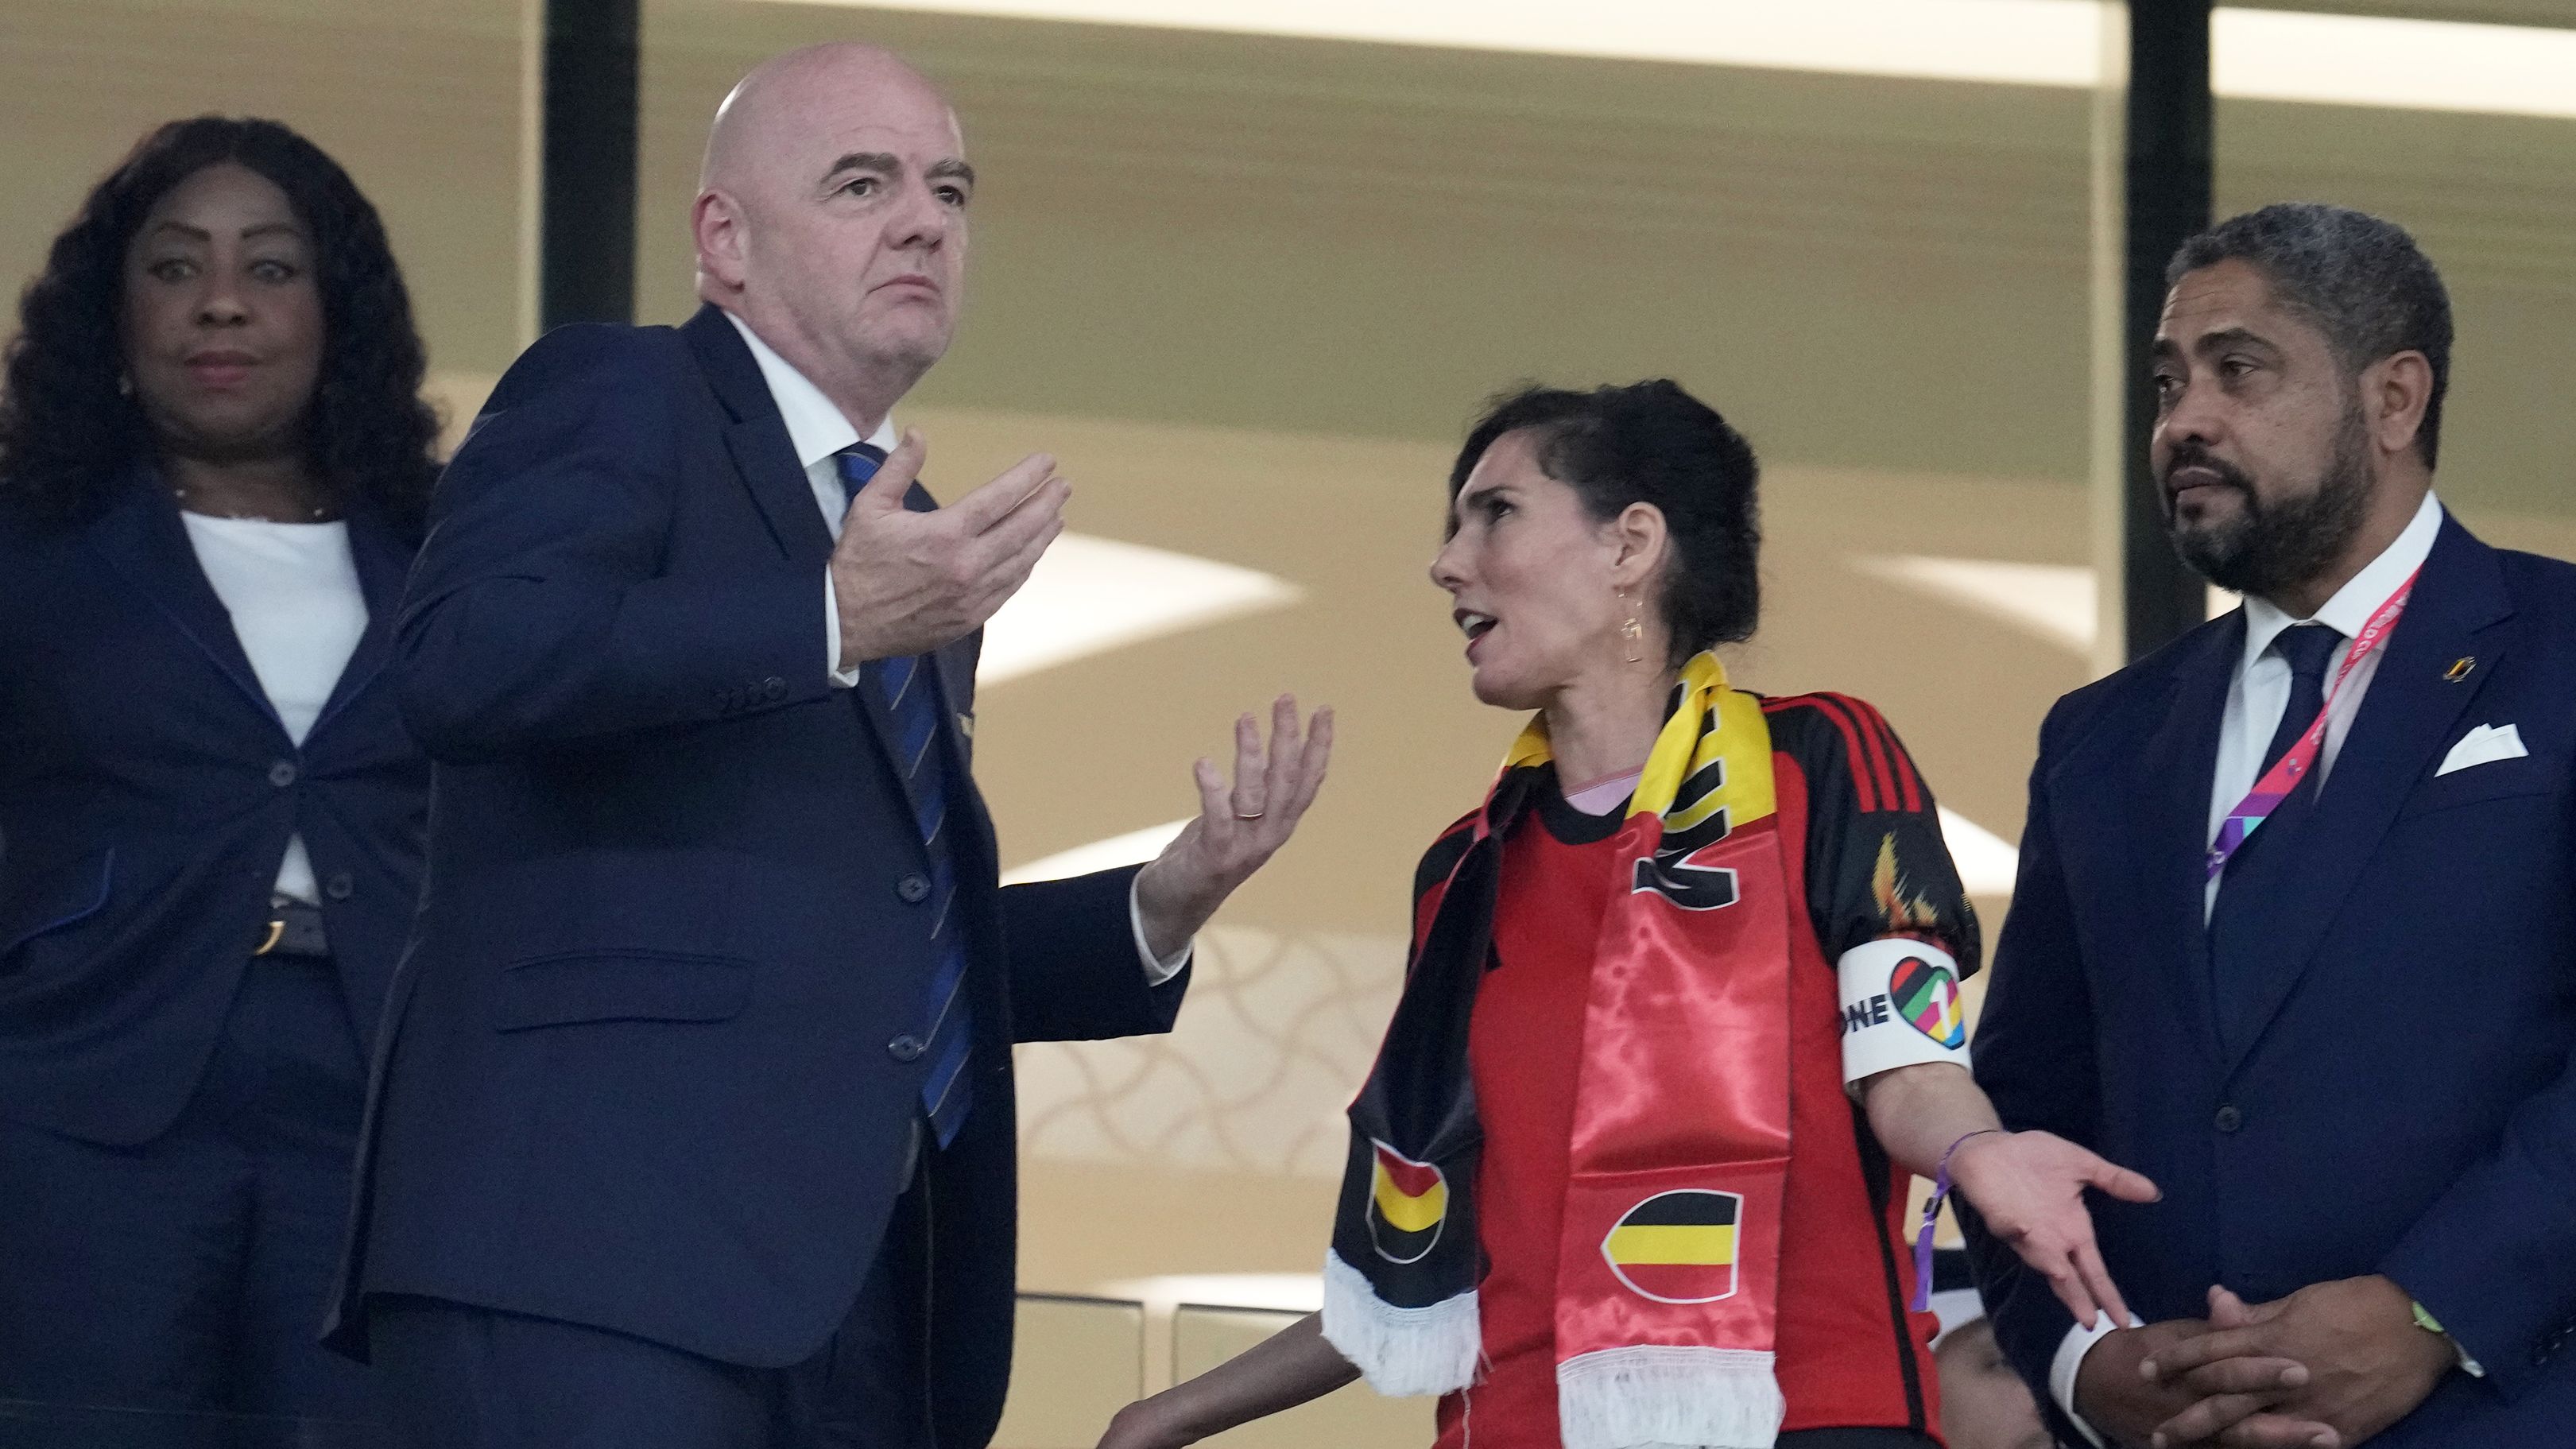 World Cup: FIFA force Belgium to change away kit amid OneLove